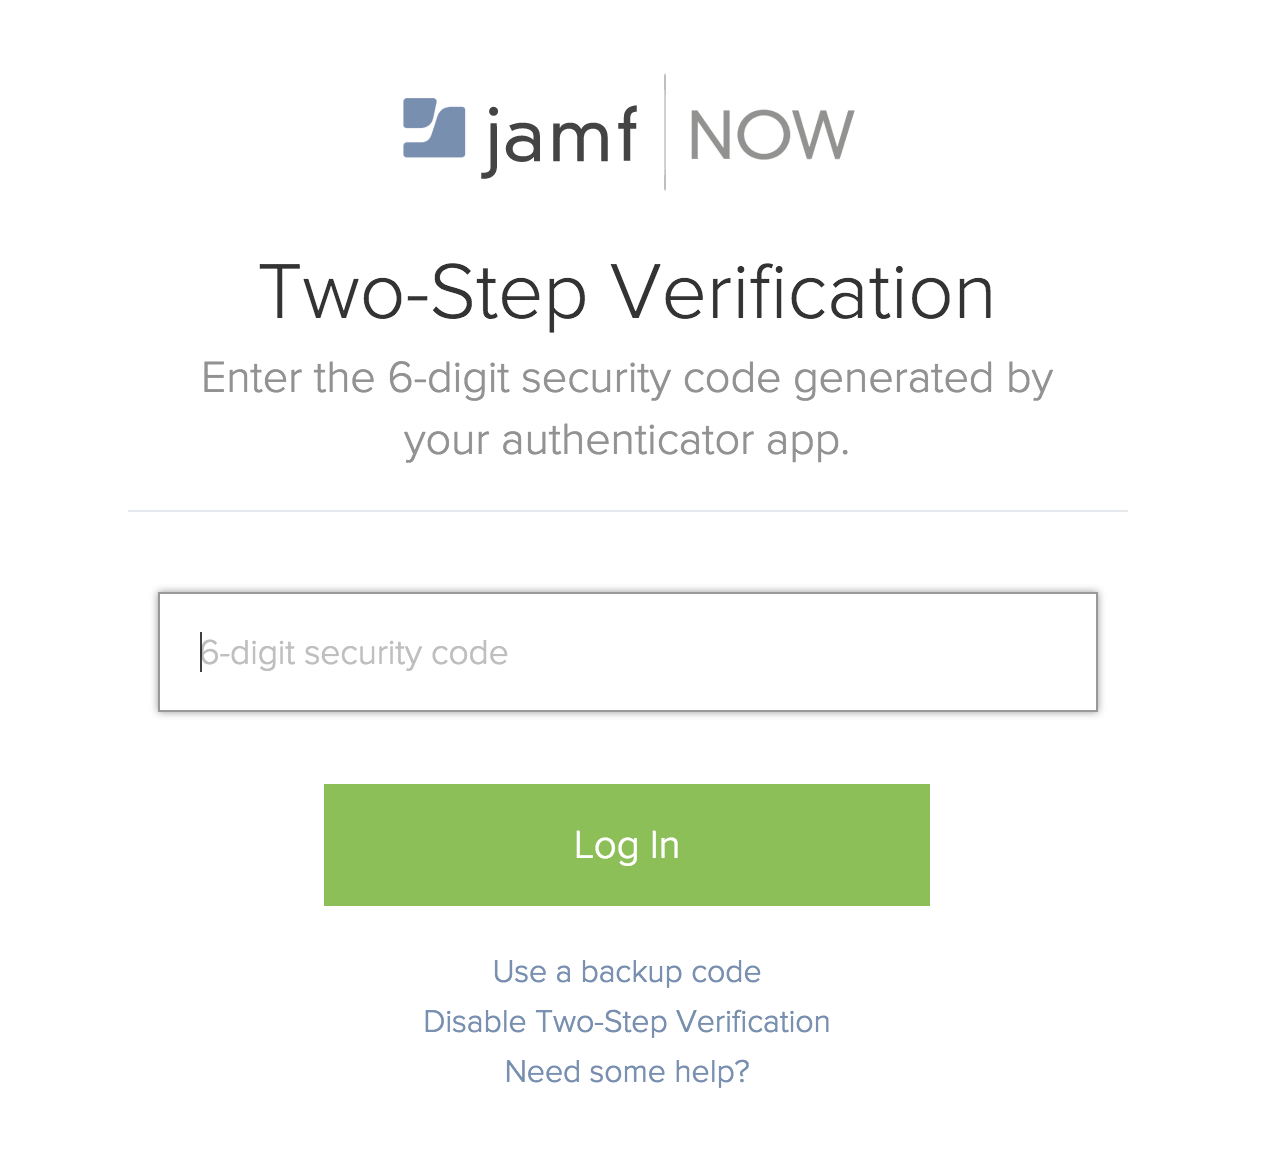 Screenshot of Two-Step Verification, with a field to enter your 6-digit security code.